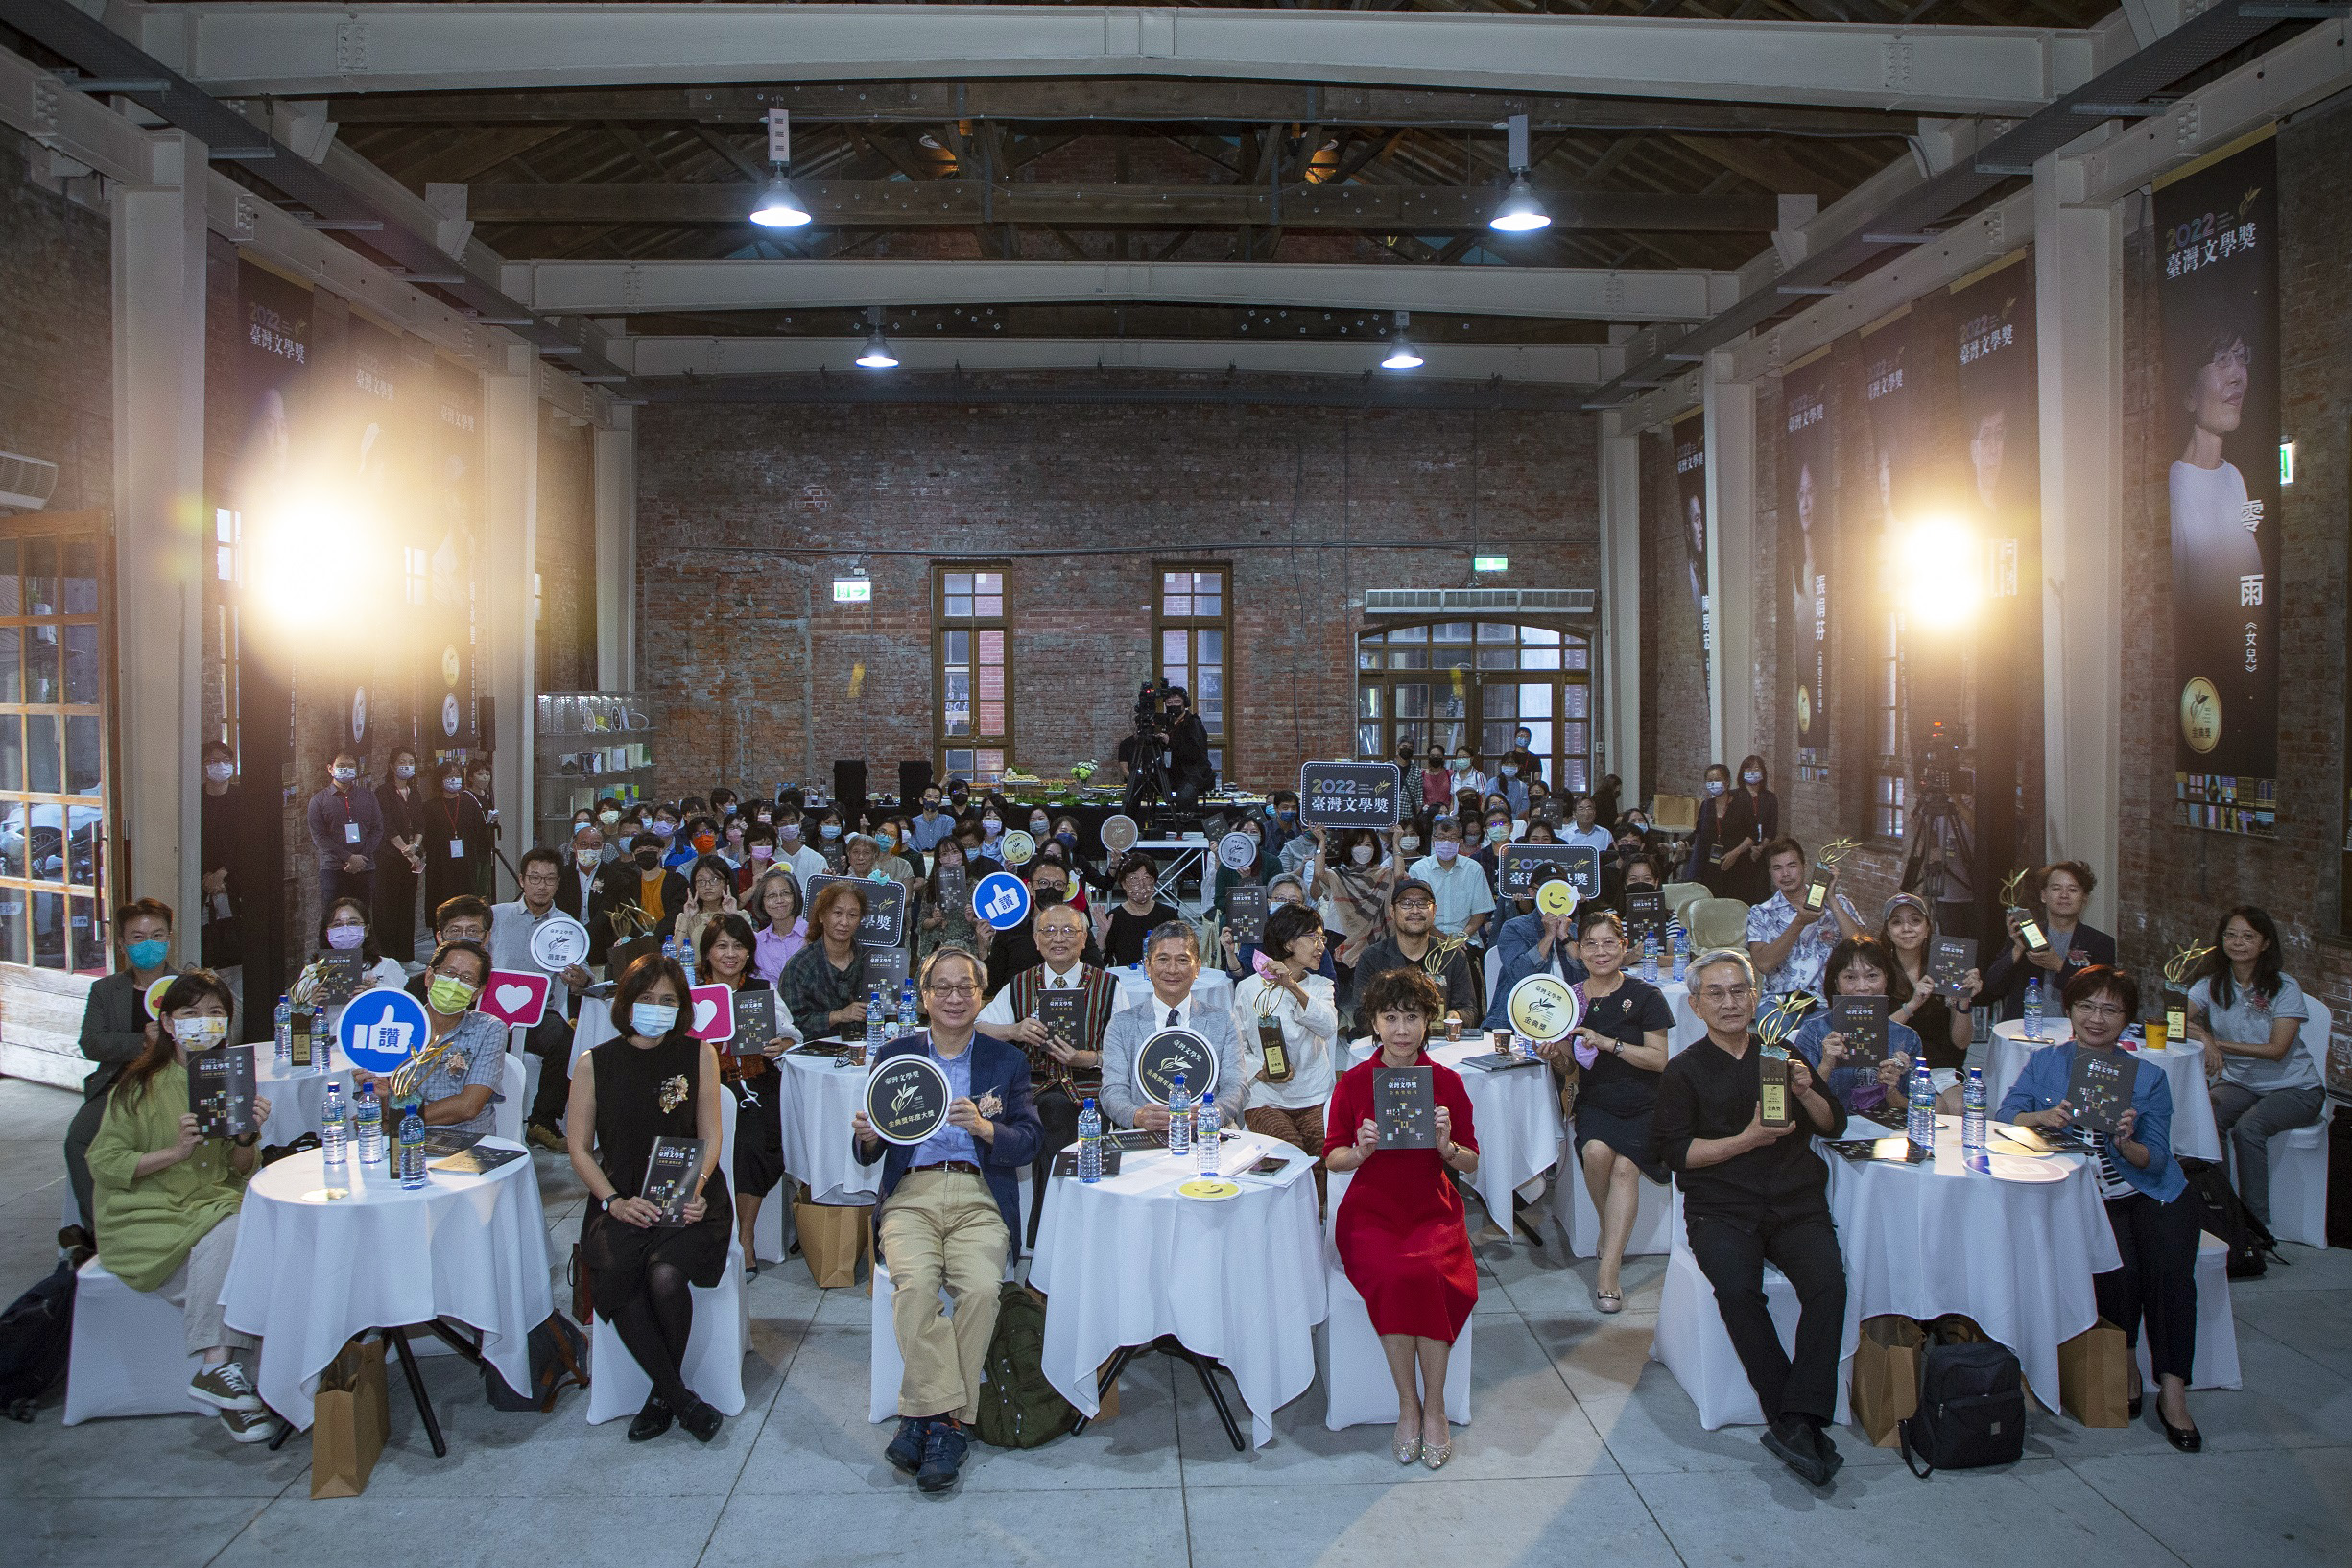 Taiwan Literature Award ceremony attendees pose for a group photo..jpg